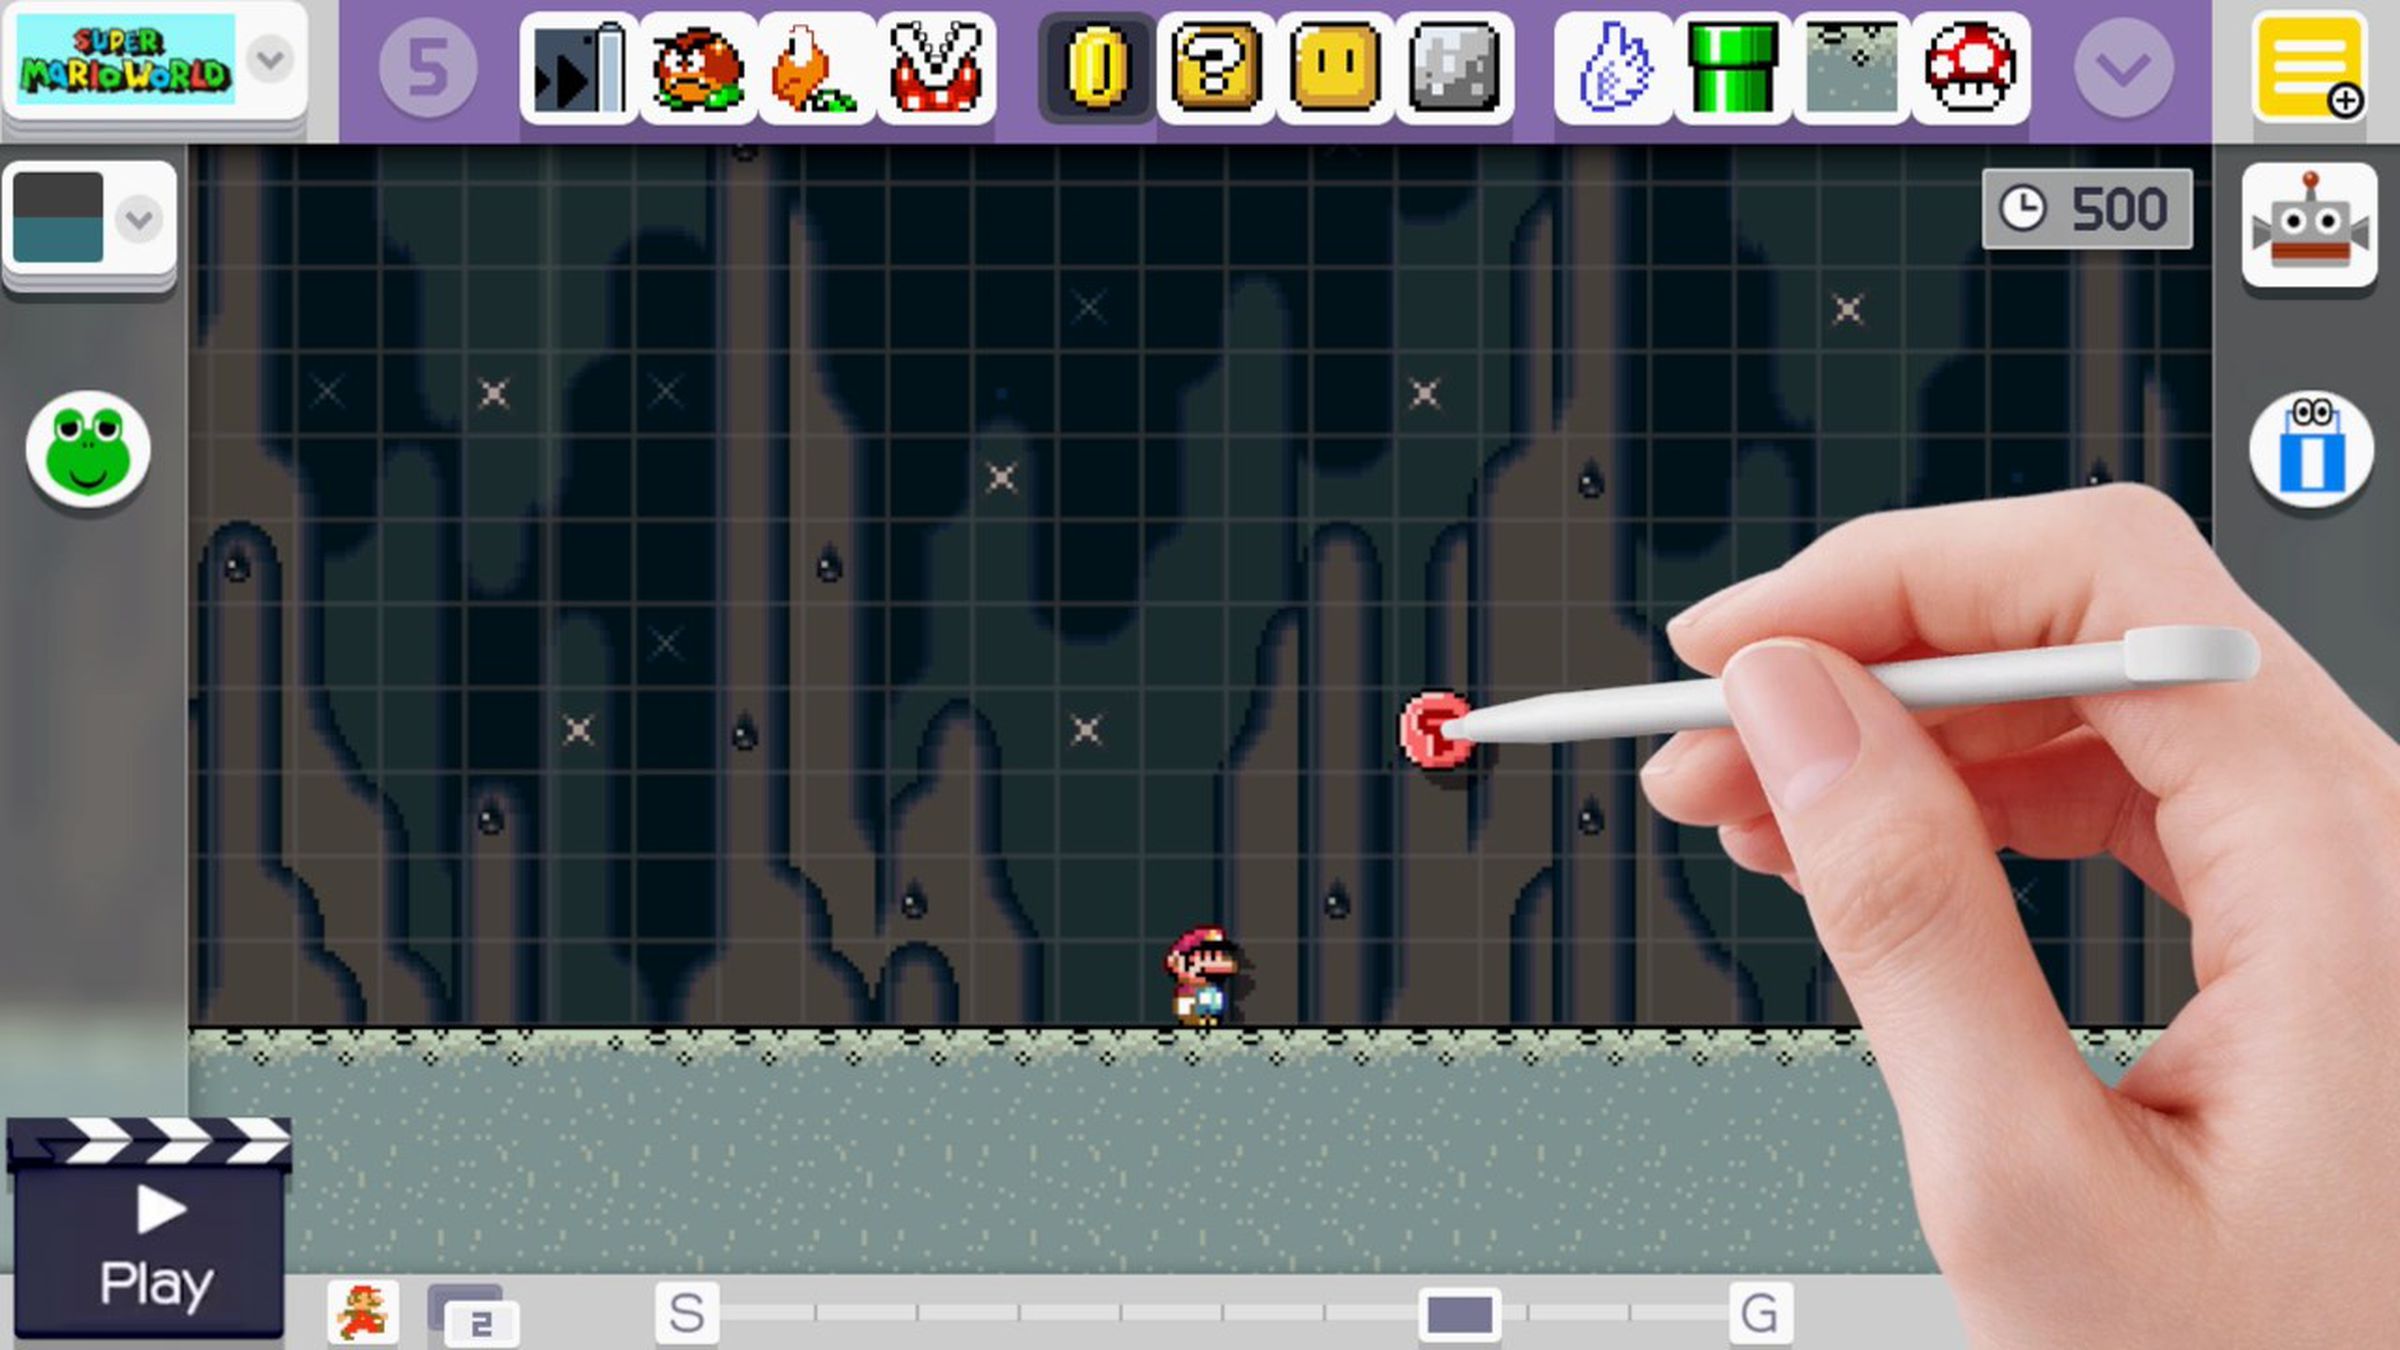 A screenshot from the video game Super Mario Maker.